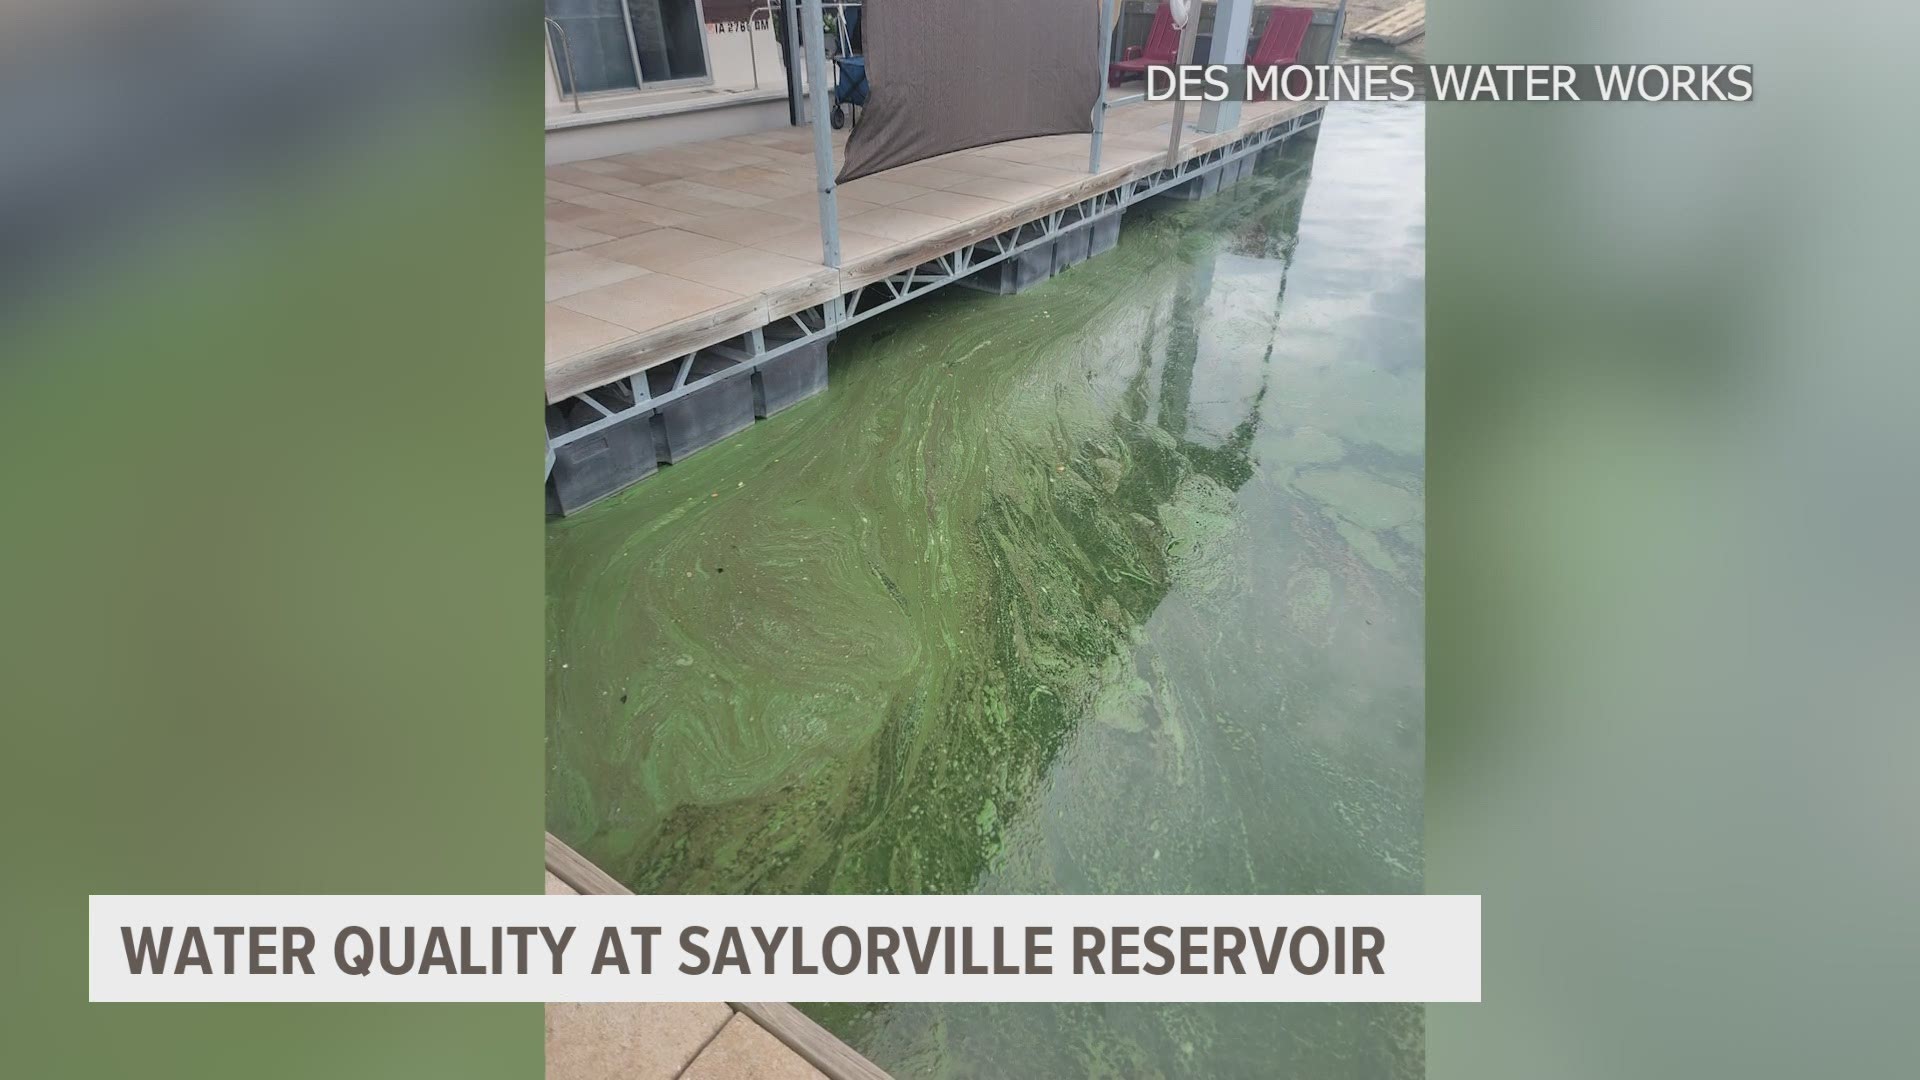 Des Moines Water Works said water quality top of mind at Saylorville Reservoir, after algae is spotted last weekend.